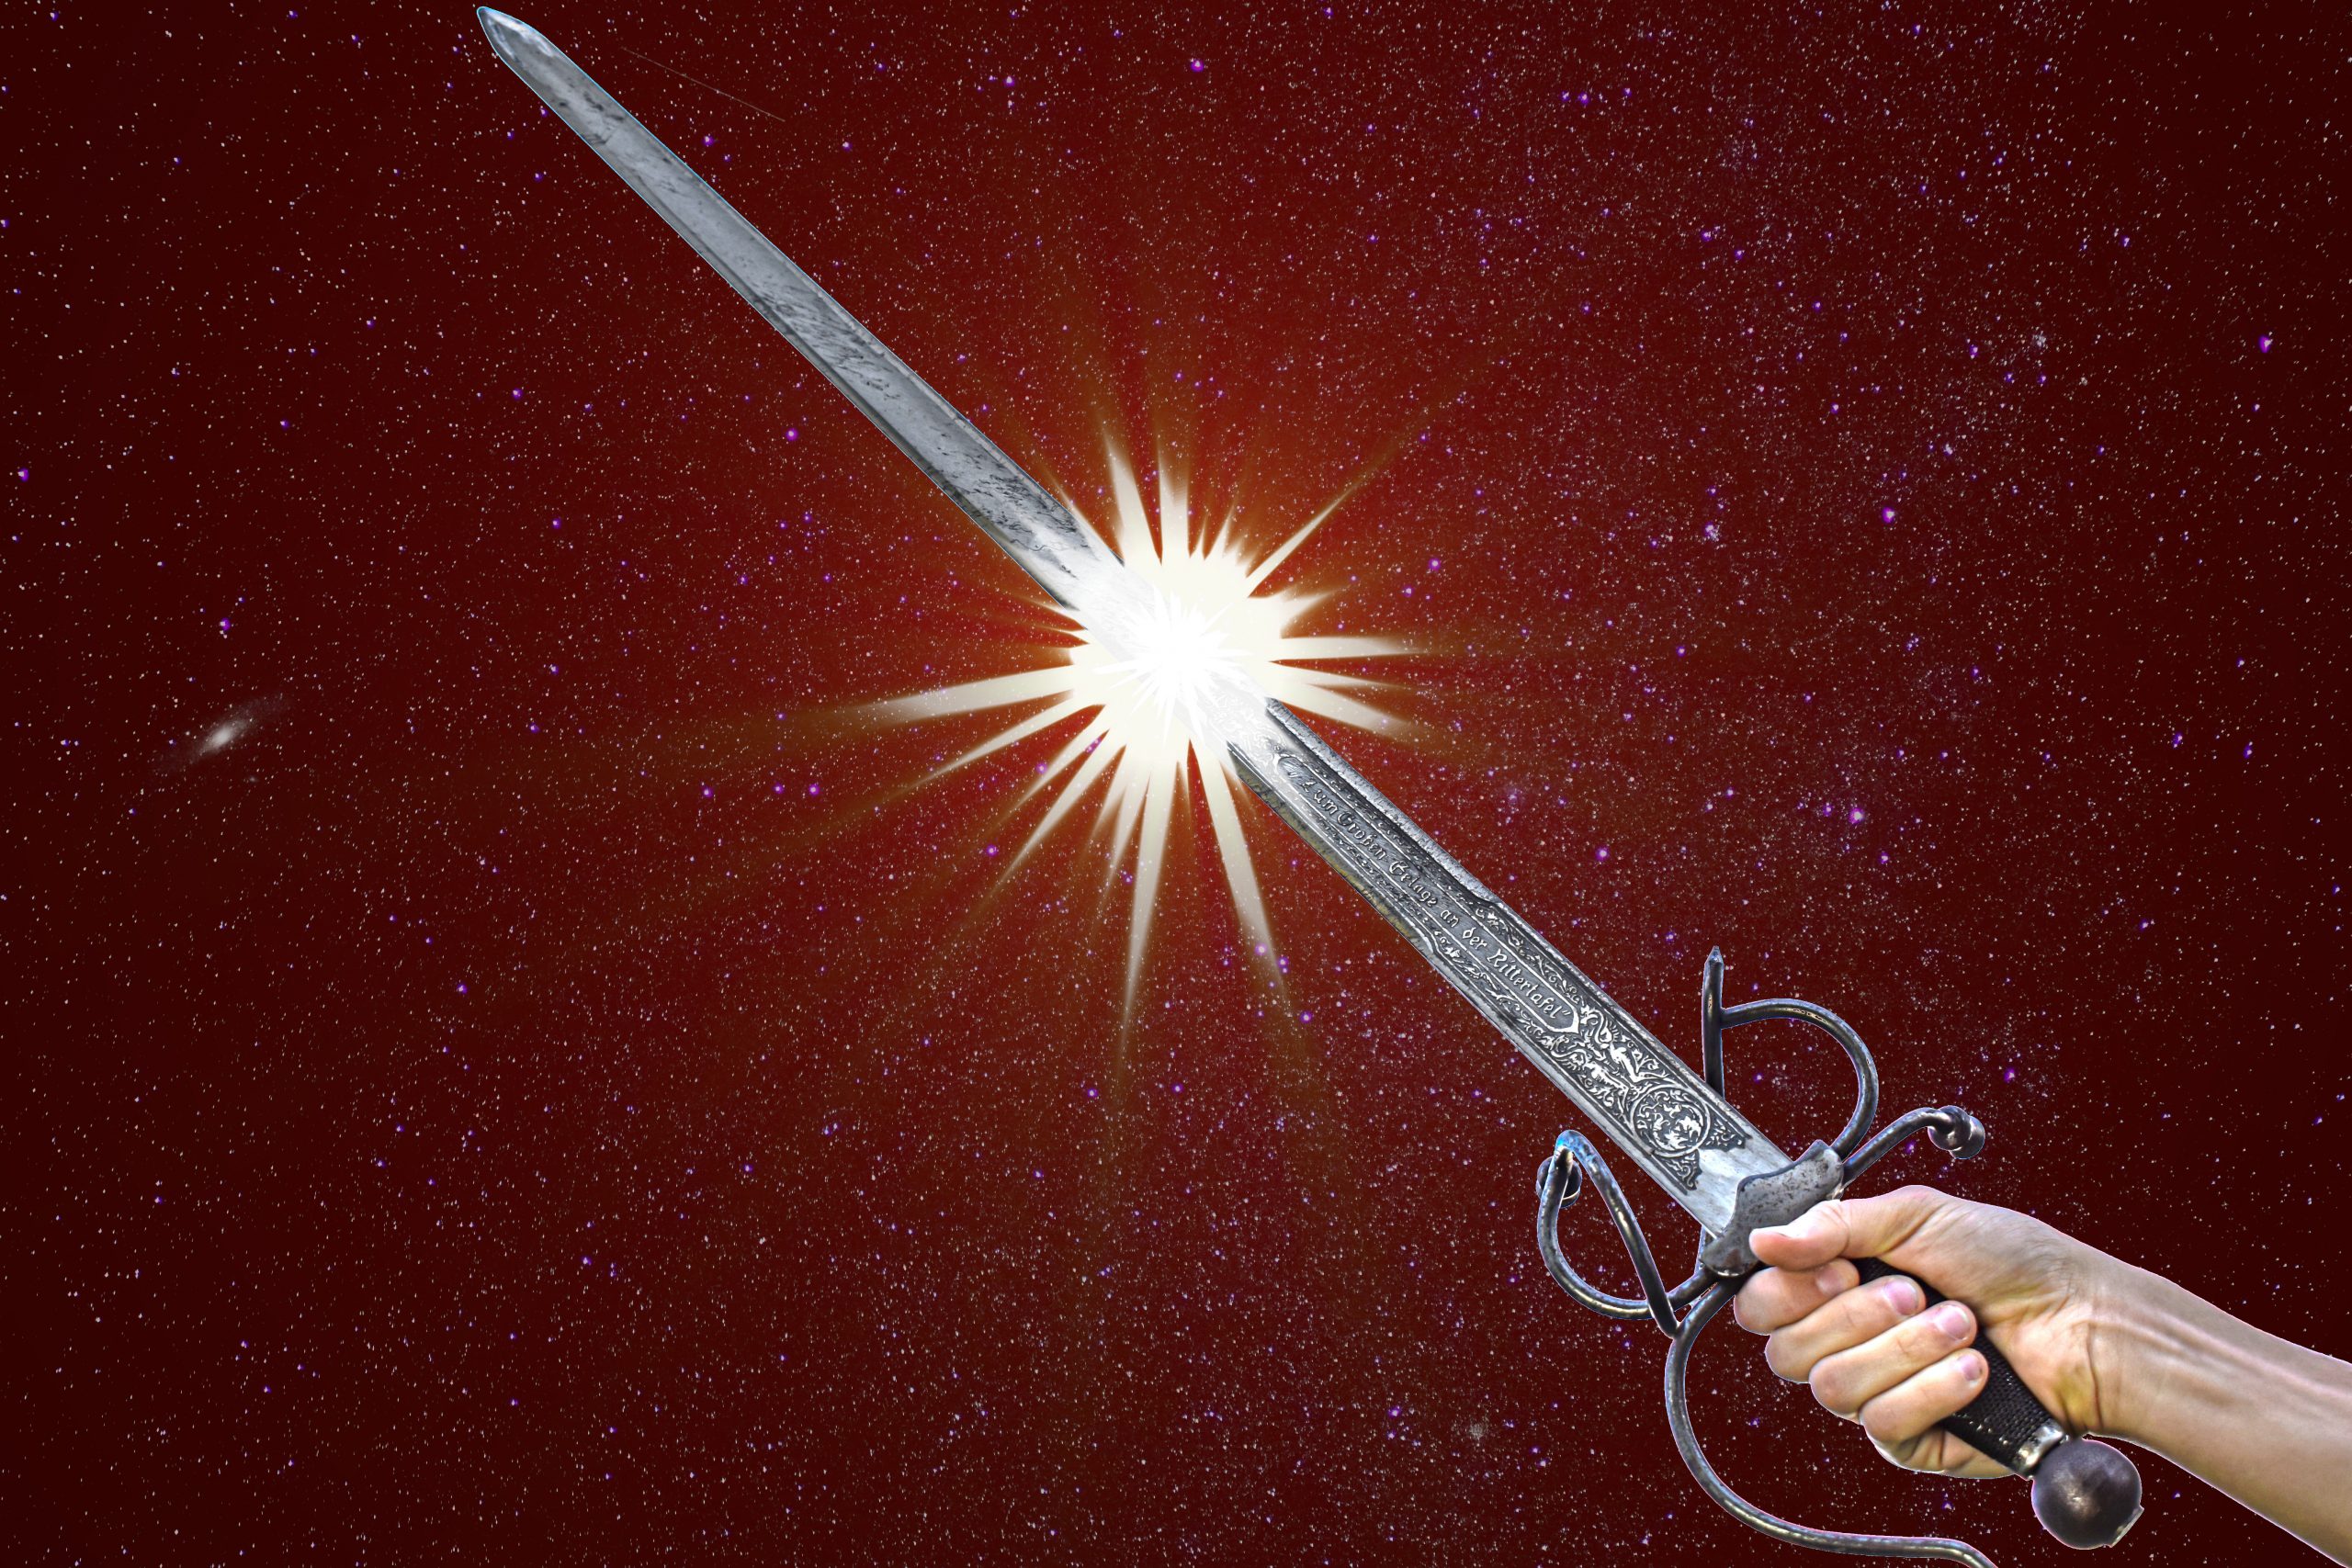 Call for Submissions: Swords in Space!